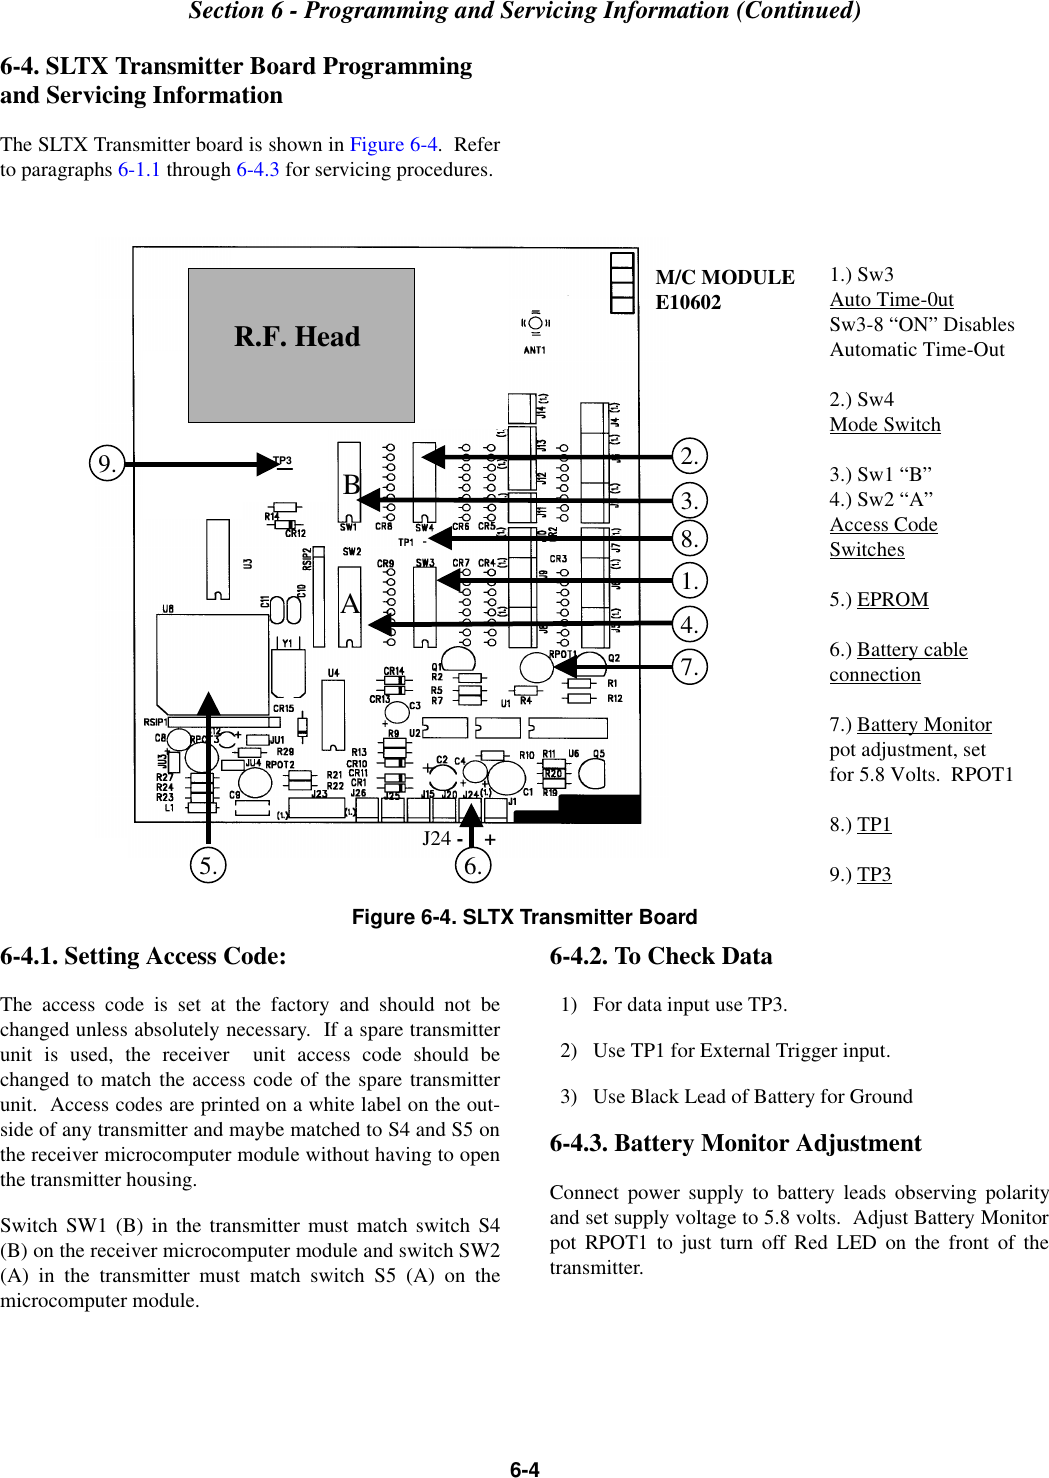 Section 6 - Programming and Servicing Information (Continued)6-46-4. SLTX Transmitter Board Programming and Servicing InformationThe SLTX Transmitter board is shown in Figure 6-4.  Referto paragraphs 6-1.1 through 6-4.3 for servicing procedures.Figure 6-4. SLTX Transmitter Board6-4.1. Setting Access Code:The access code is set at the factory and should not bechanged unless absolutely necessary.  If a spare transmitterunit is used, the receiver  unit access code should bechanged to match the access code of the spare transmitterunit.  Access codes are printed on a white label on the out-side of any transmitter and maybe matched to S4 and S5 onthe receiver microcomputer module without having to openthe transmitter housing. Switch SW1 (B) in the transmitter must match switch S4(B) on the receiver microcomputer module and switch SW2(A) in the transmitter must match switch S5 (A) on themicrocomputer module.6-4.2. To Check Data  1)   For data input use TP3.  2)   Use TP1 for External Trigger input.  3)   Use Black Lead of Battery for Ground6-4.3. Battery Monitor AdjustmentConnect power supply to battery leads observing polarityand set supply voltage to 5.8 volts.  Adjust Battery Monitorpot RPOT1 to just turn off Red LED on the front of thetransmitter.BA1.) Sw3Auto Time-0utSw3-8 “ON” DisablesAutomatic Time-Out2.) Sw4Mode Switch3.) Sw1 “B”4.) Sw2 “A”Access CodeSwitches5.) EPROM6.) Battery cableconnection7.) Battery Monitorpot adjustment, setfor 5.8 Volts.  RPOT18.) TP19.) TP32.3.4.7.1.8.J24 -    +6.5.TP3R.F. HeadM/C MODULEE106029.